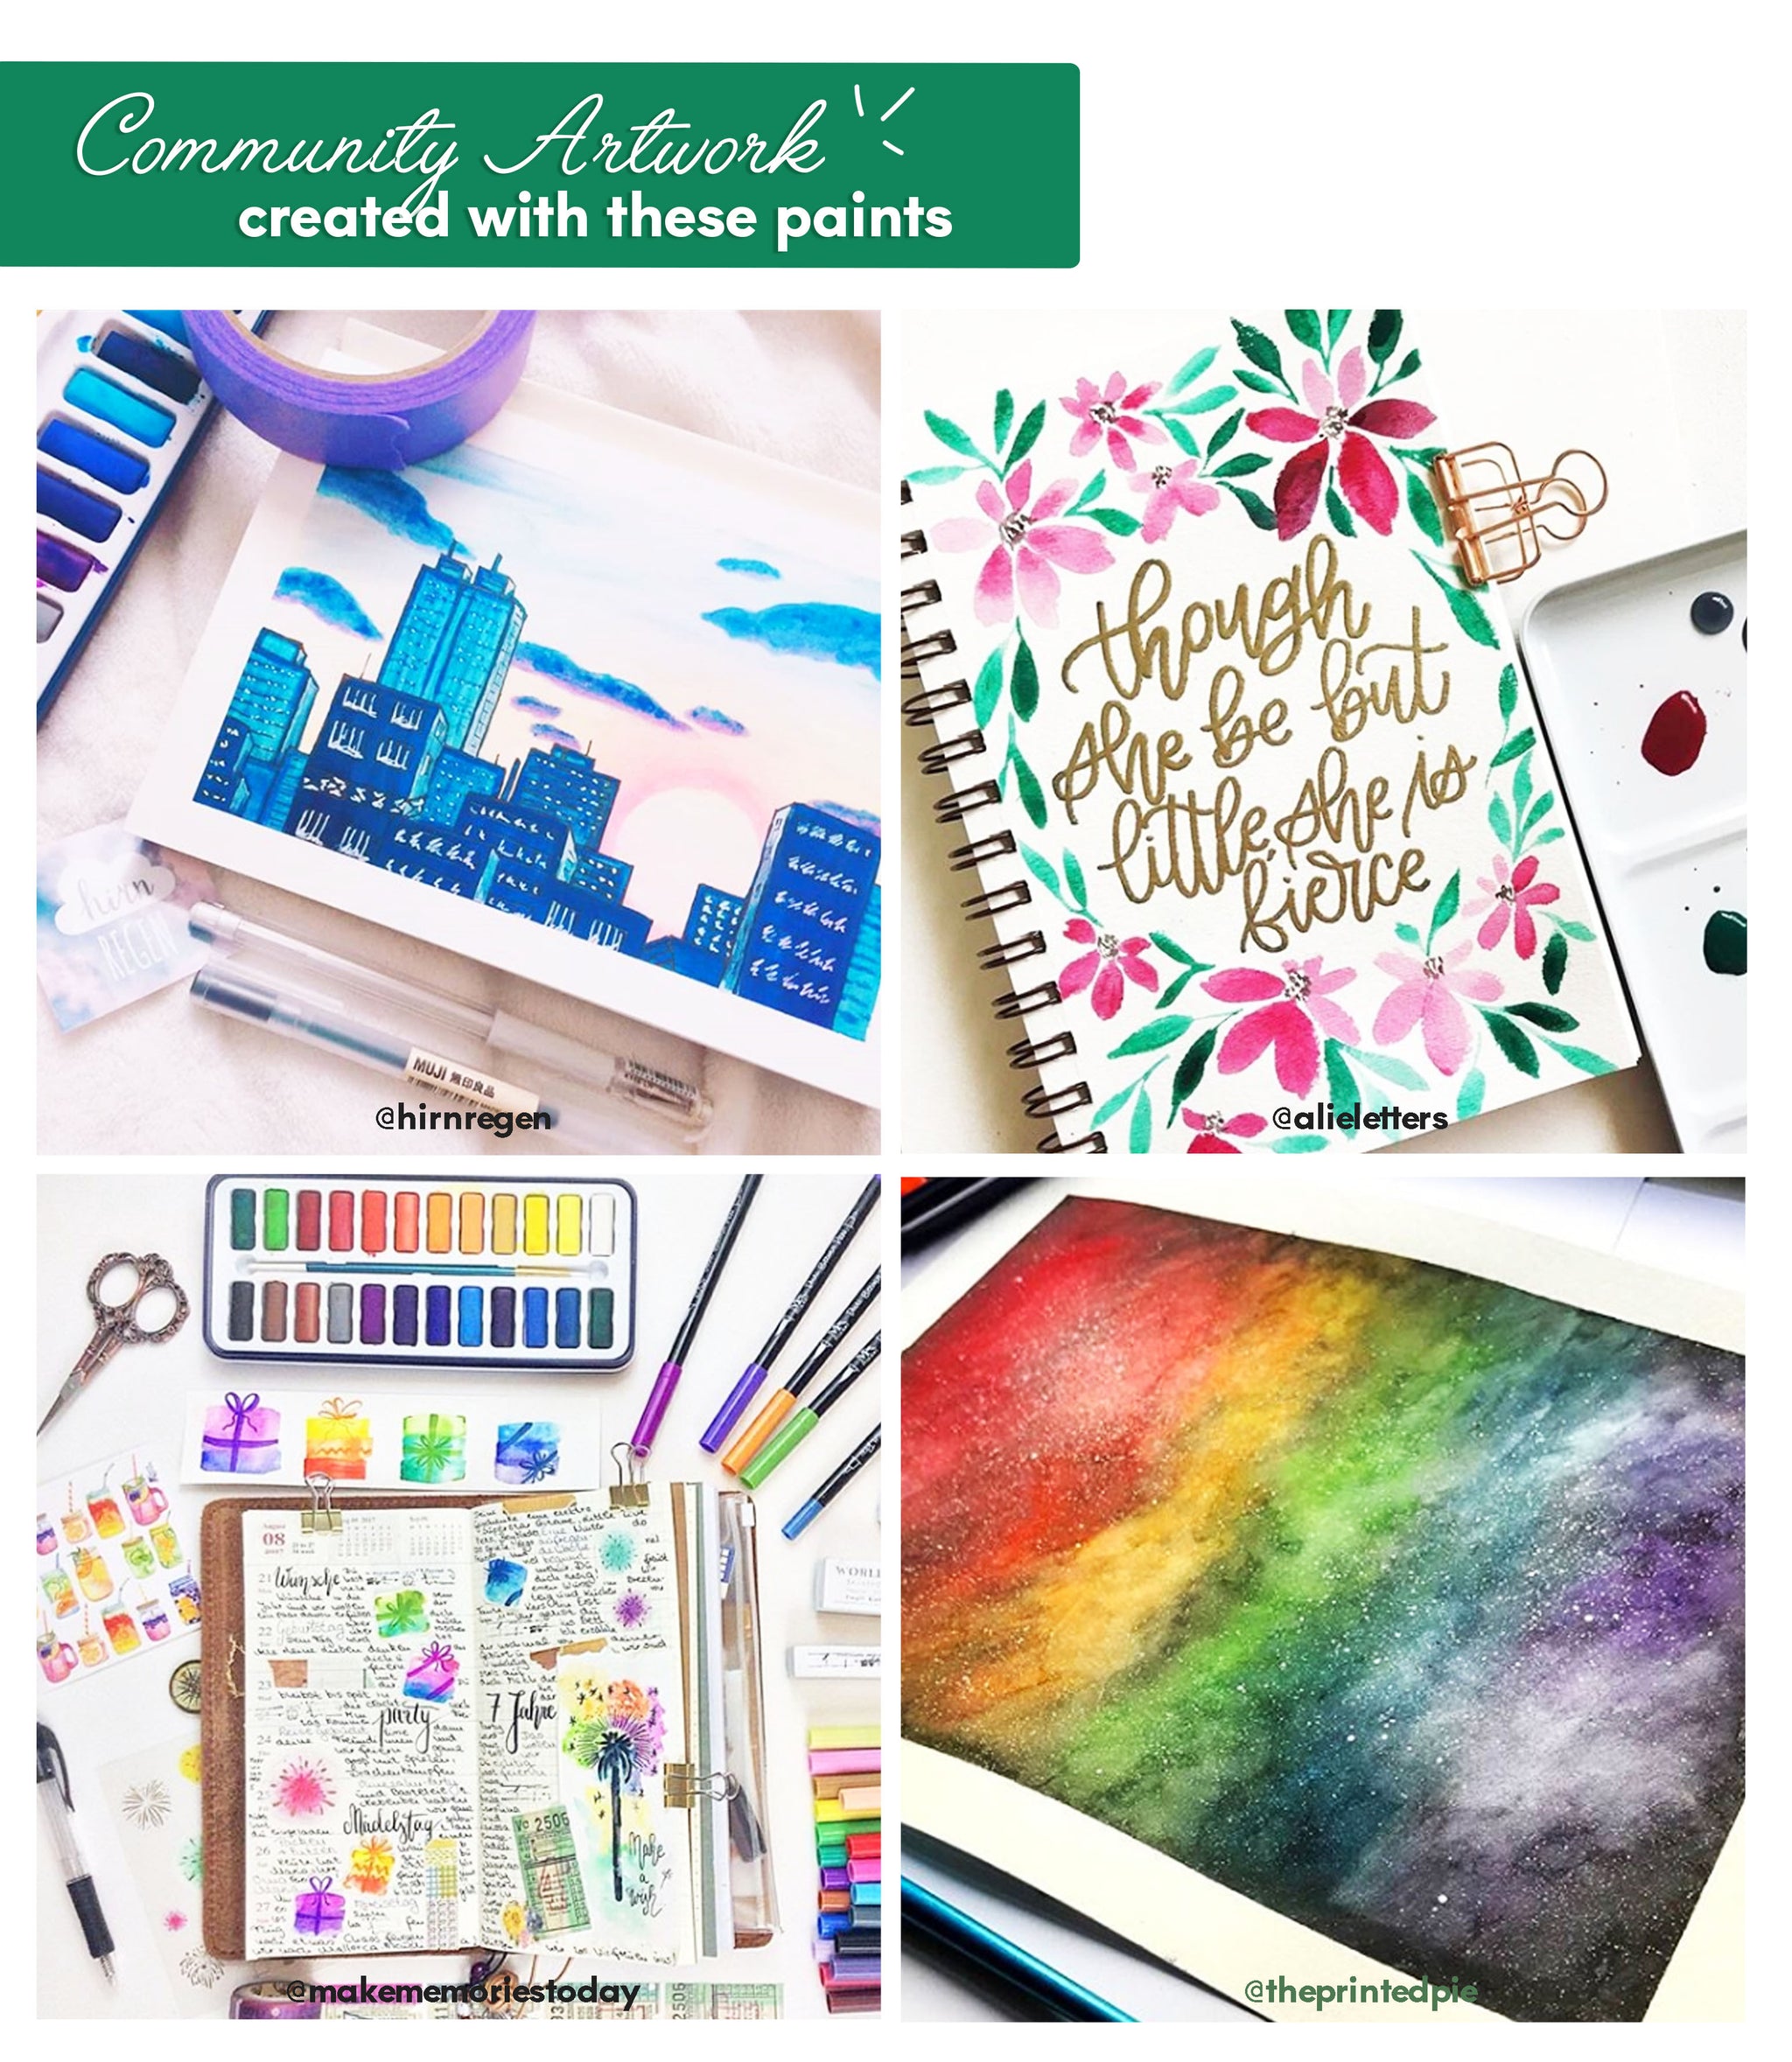 Premium Non-Toxic Watercolor Paint Set for Kids and Adults - Vibrant Water